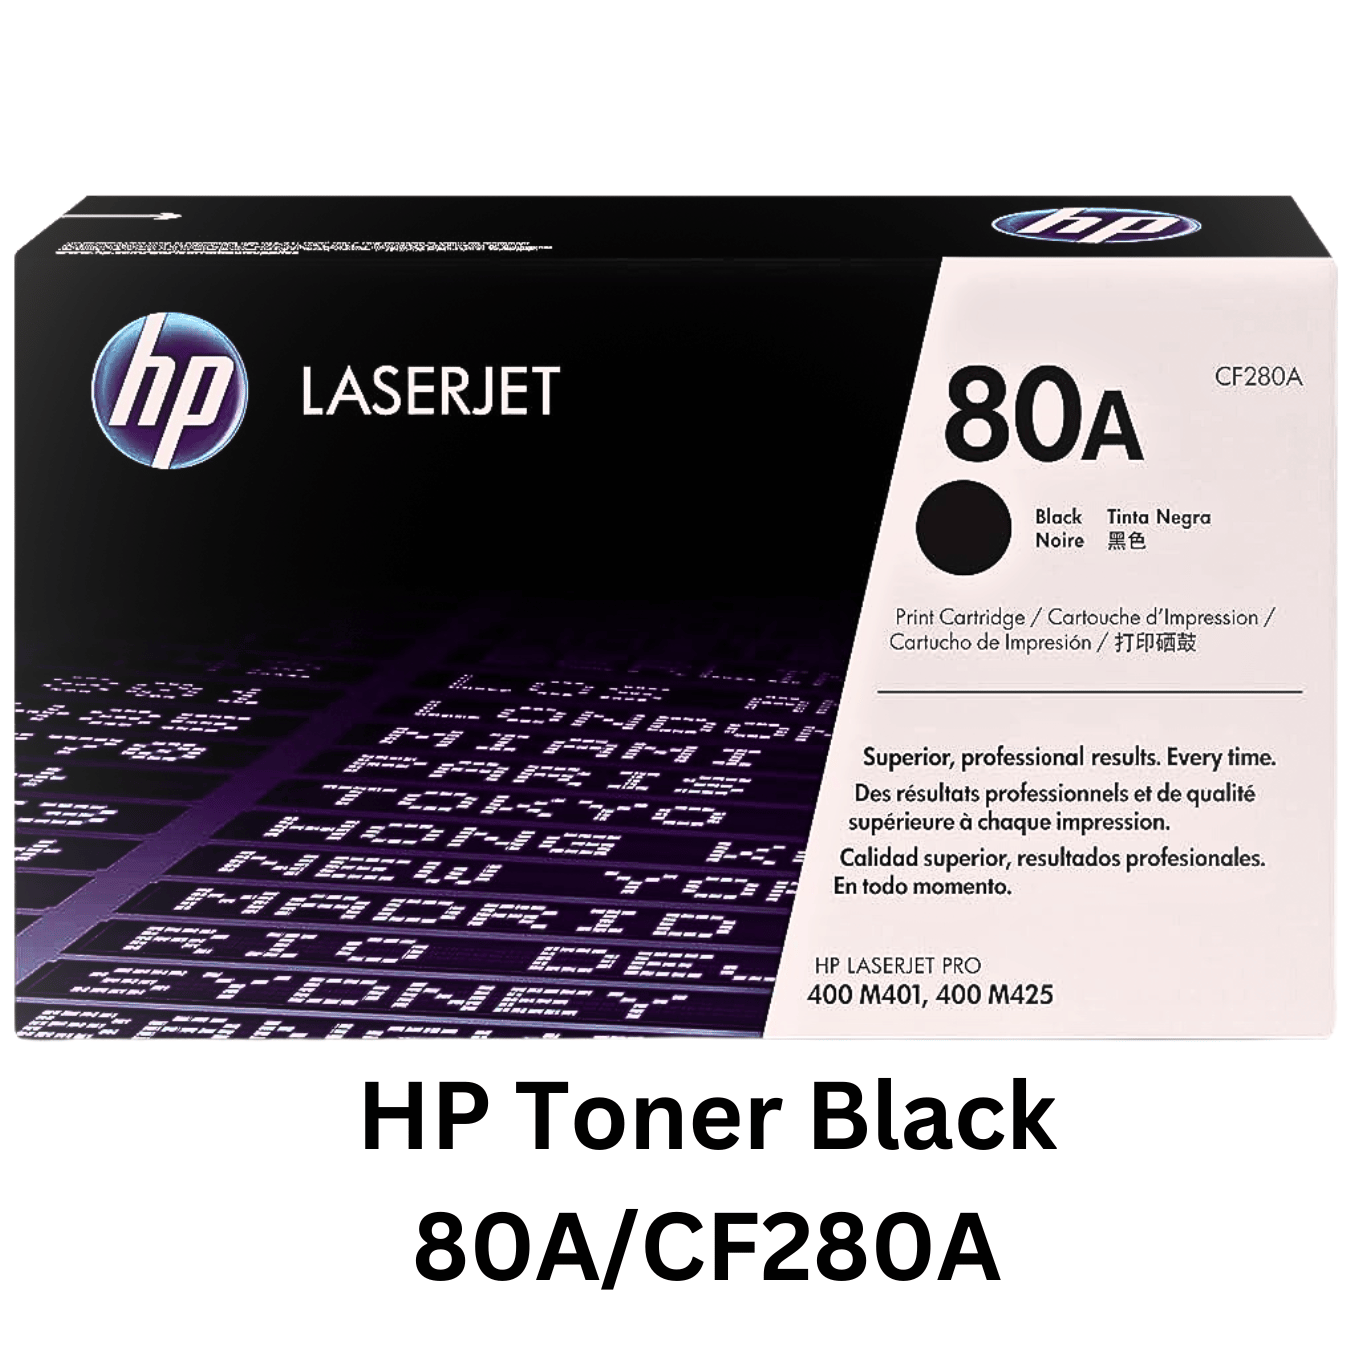 HP Toner Black 80A/CF280A - High-quality black toner cartridge for consistent and sharp text and graphics printing